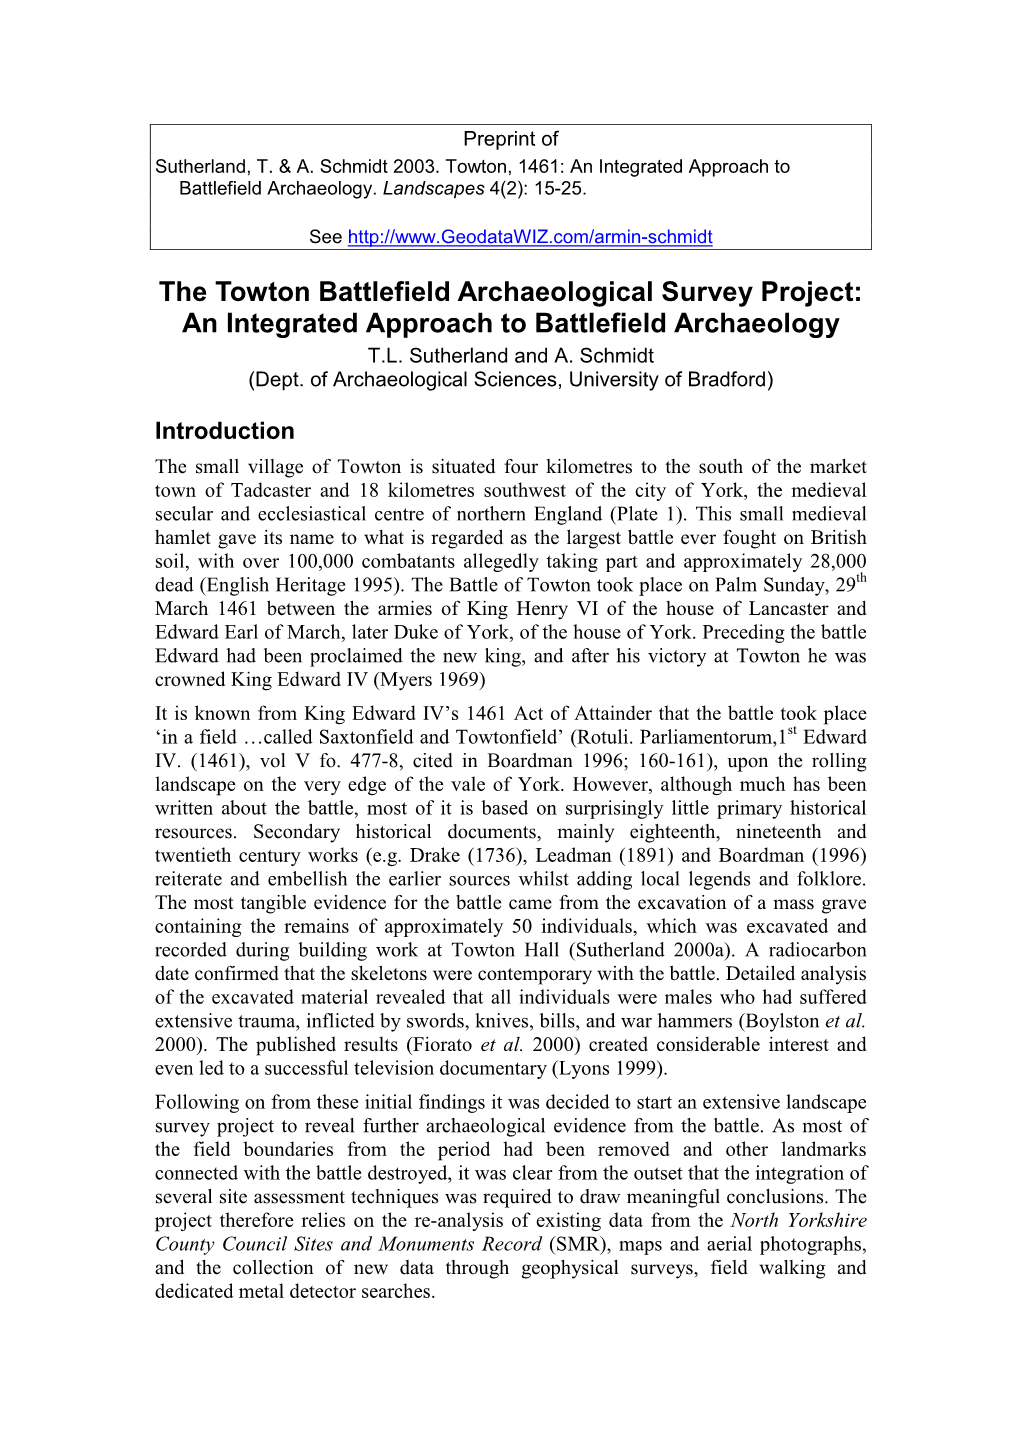 The Towton Battlefield Archaeological Survey Project: an Integrated Approach to Battlefield Archaeology T.L